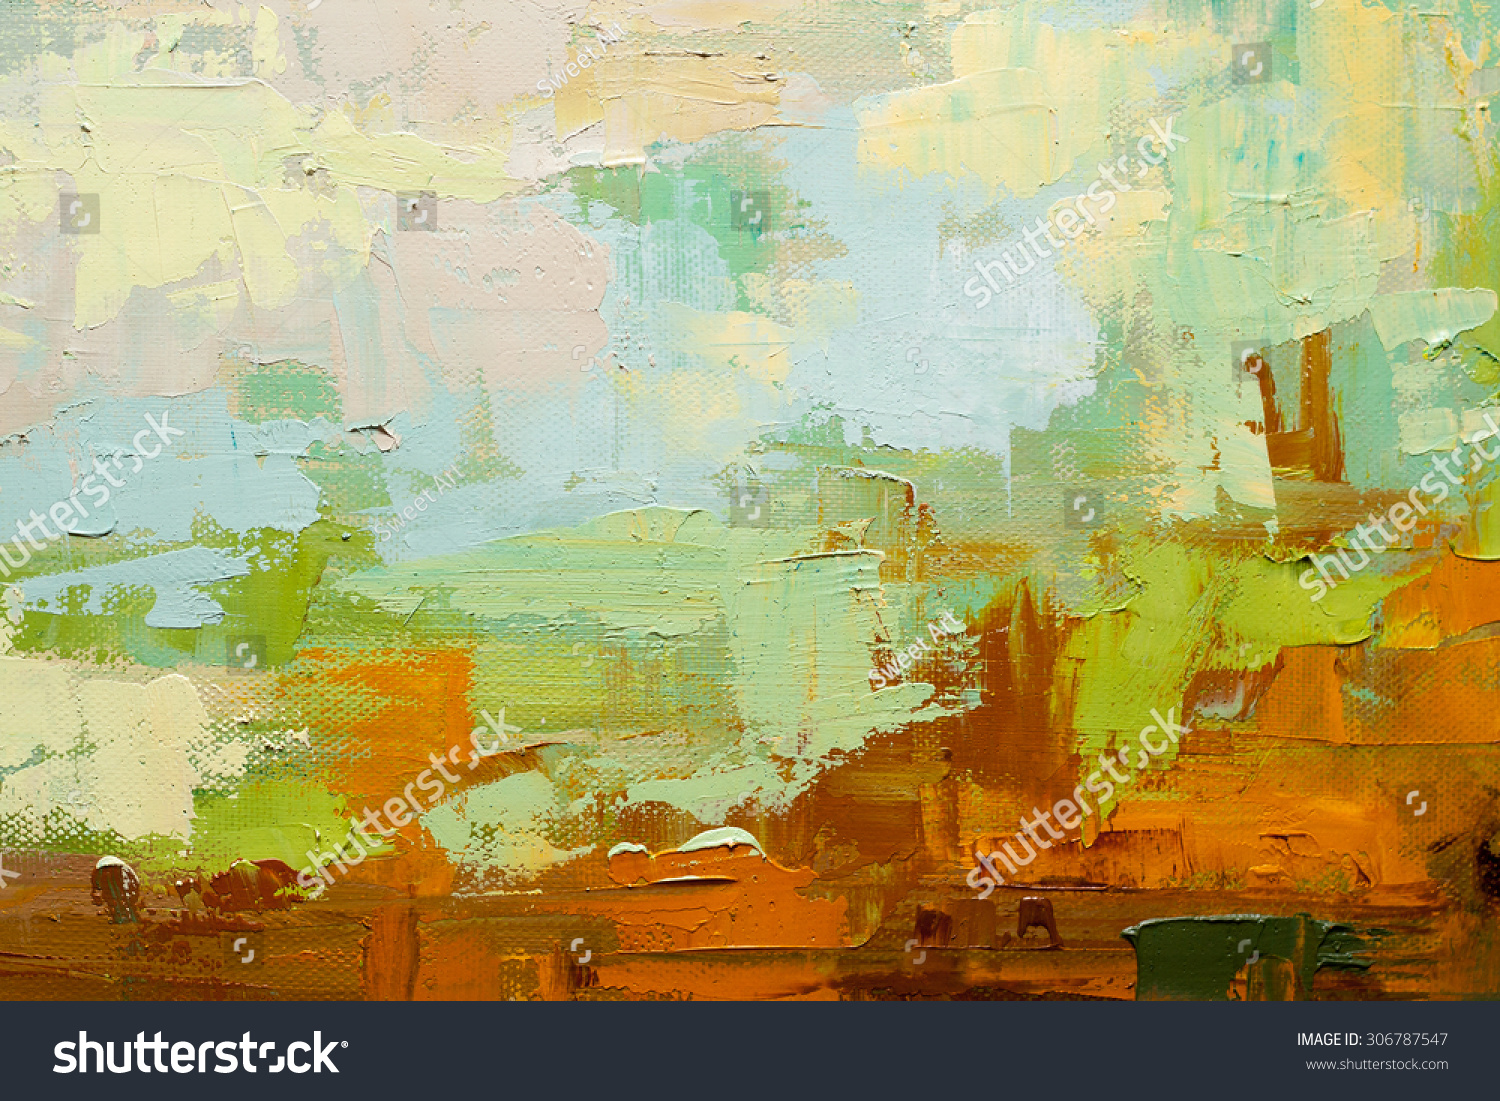 Abstract Art Background. Oil Painting On Canvas. Green, White And Brown ...